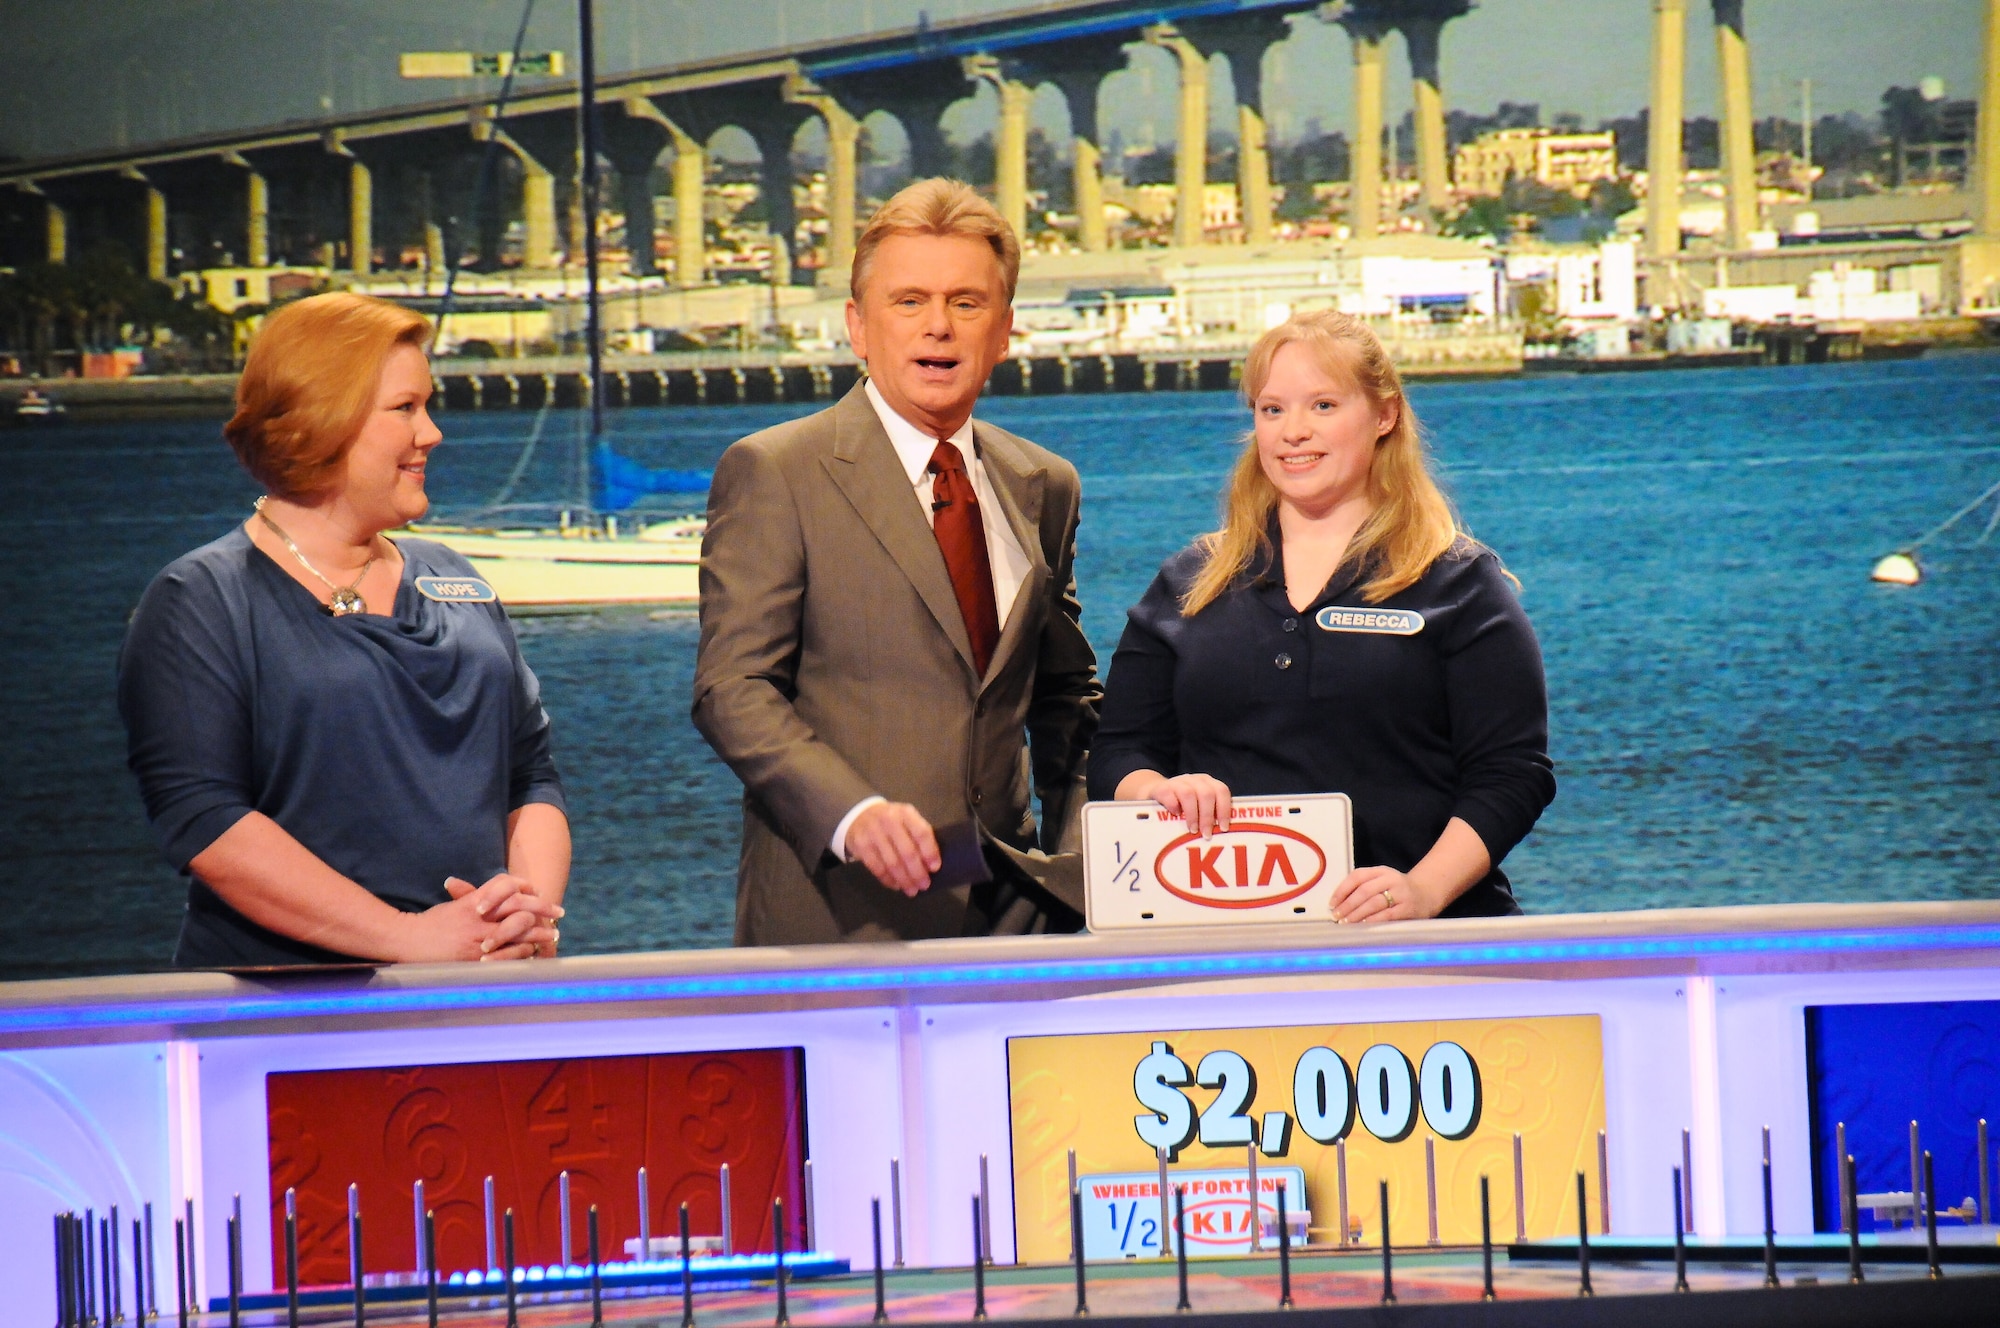 Rebecca Sander, center, wife of Tech. Sgt. Jeffrey Sander, and Hope Mazzeo, left, a Marine spouse, joined military spouses from all branches of service to particpate on Wheel of Fortune for Military Spouses Week, at Sony Studios in Culver City, Calif., Jan 12, 2012. This was the first time the game show highlighted military spouses; the show aired Feb. 6, 2012 (U.S. Air Force photo by Joseph, Juarez/RELEASED)
